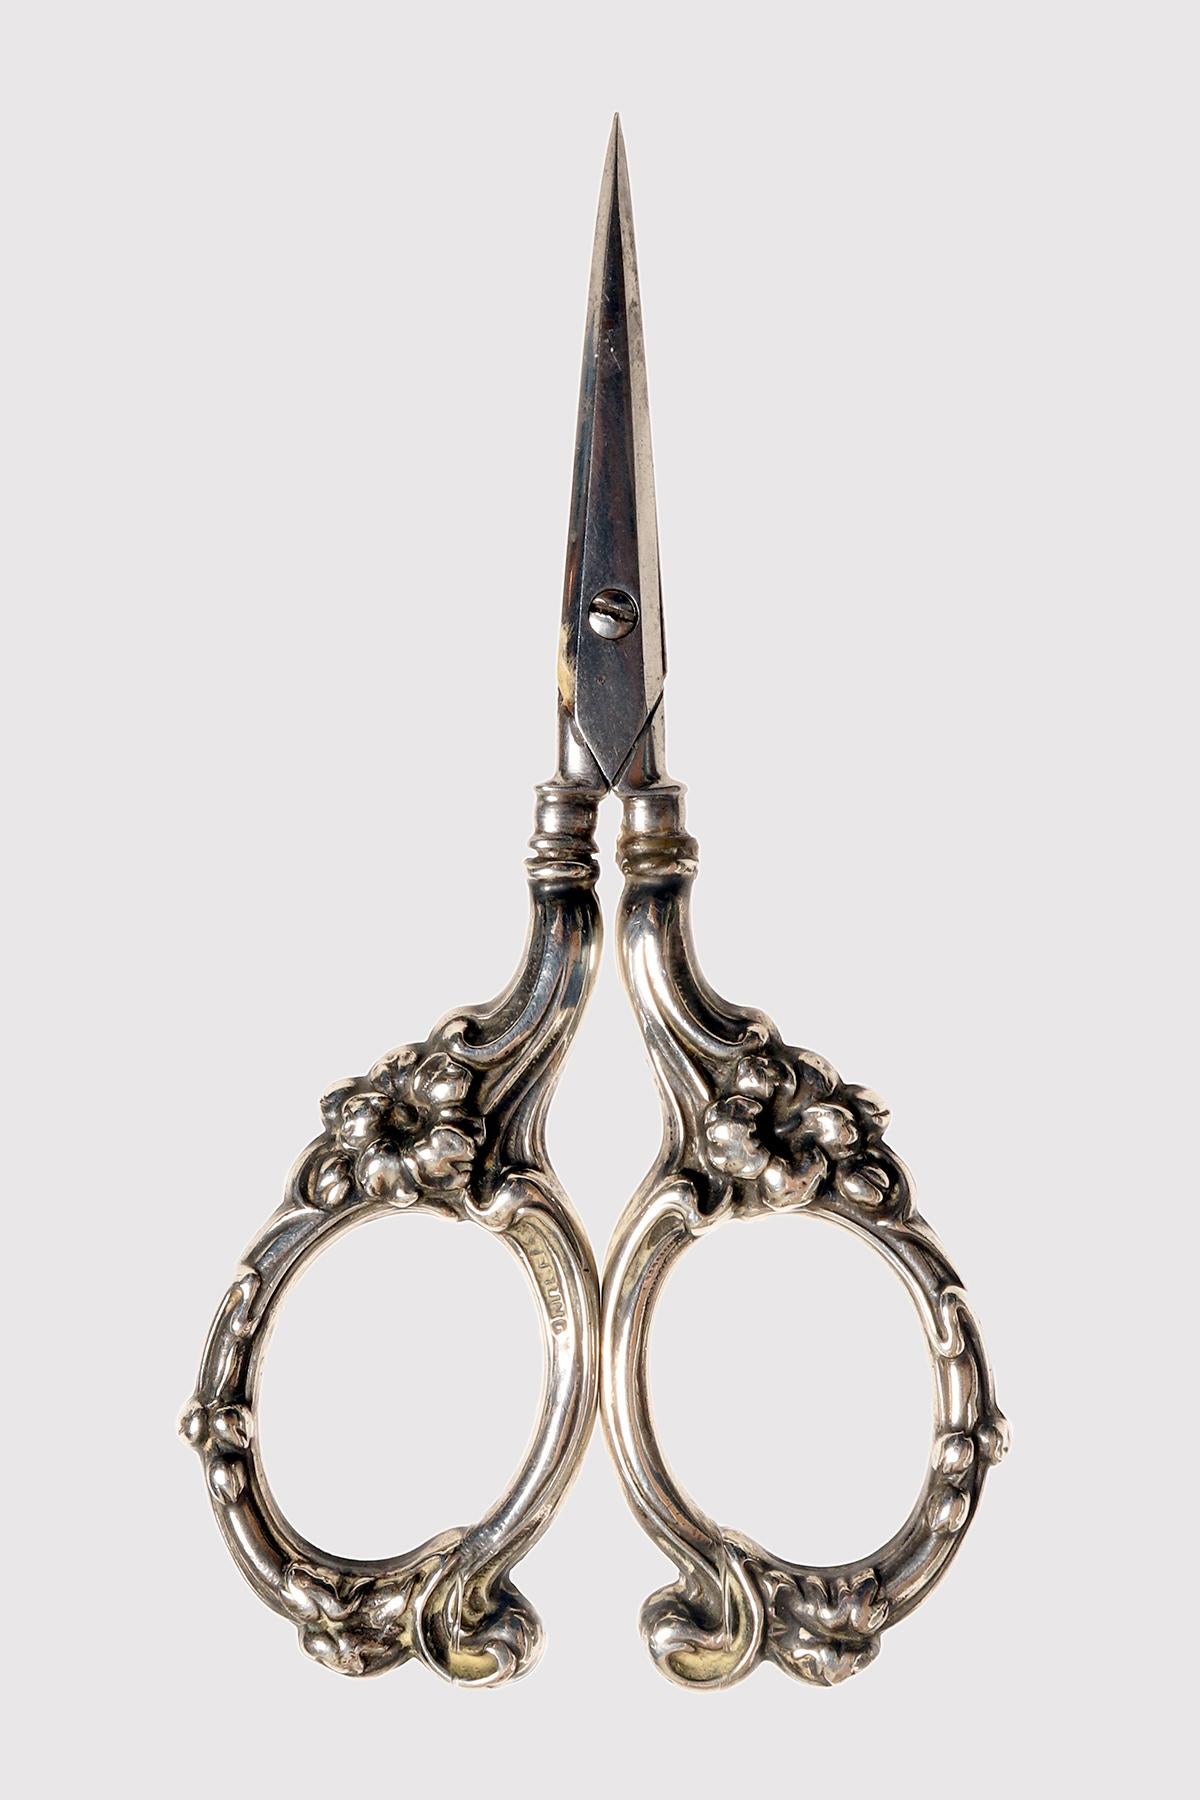 Vintage Sterling Silver Grape Shears/Scissors by Watson of Attleboro, MA. They were manufacturers of silver novelties from 1880 onwards. These grape shears feature floral style handles, depicting flowers, made of 925/1000 sterling silver and German